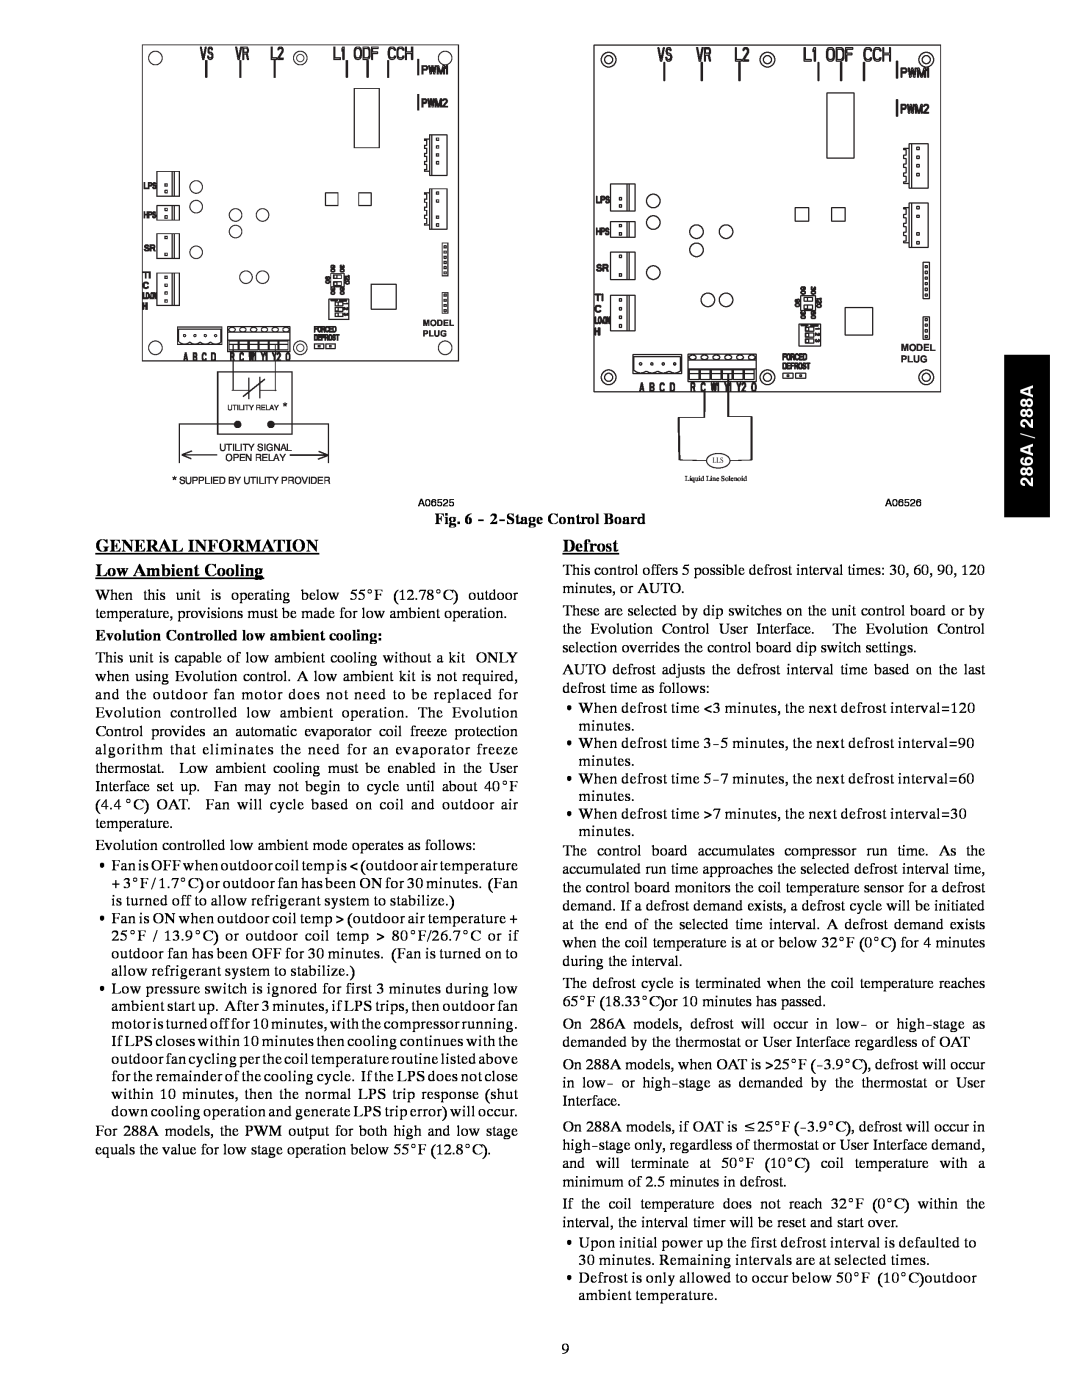 Bryant instruction manual GENERAL INFORMATION Low Ambient Cooling, Defrost, 2-StageControl Board, 286A / 288A 